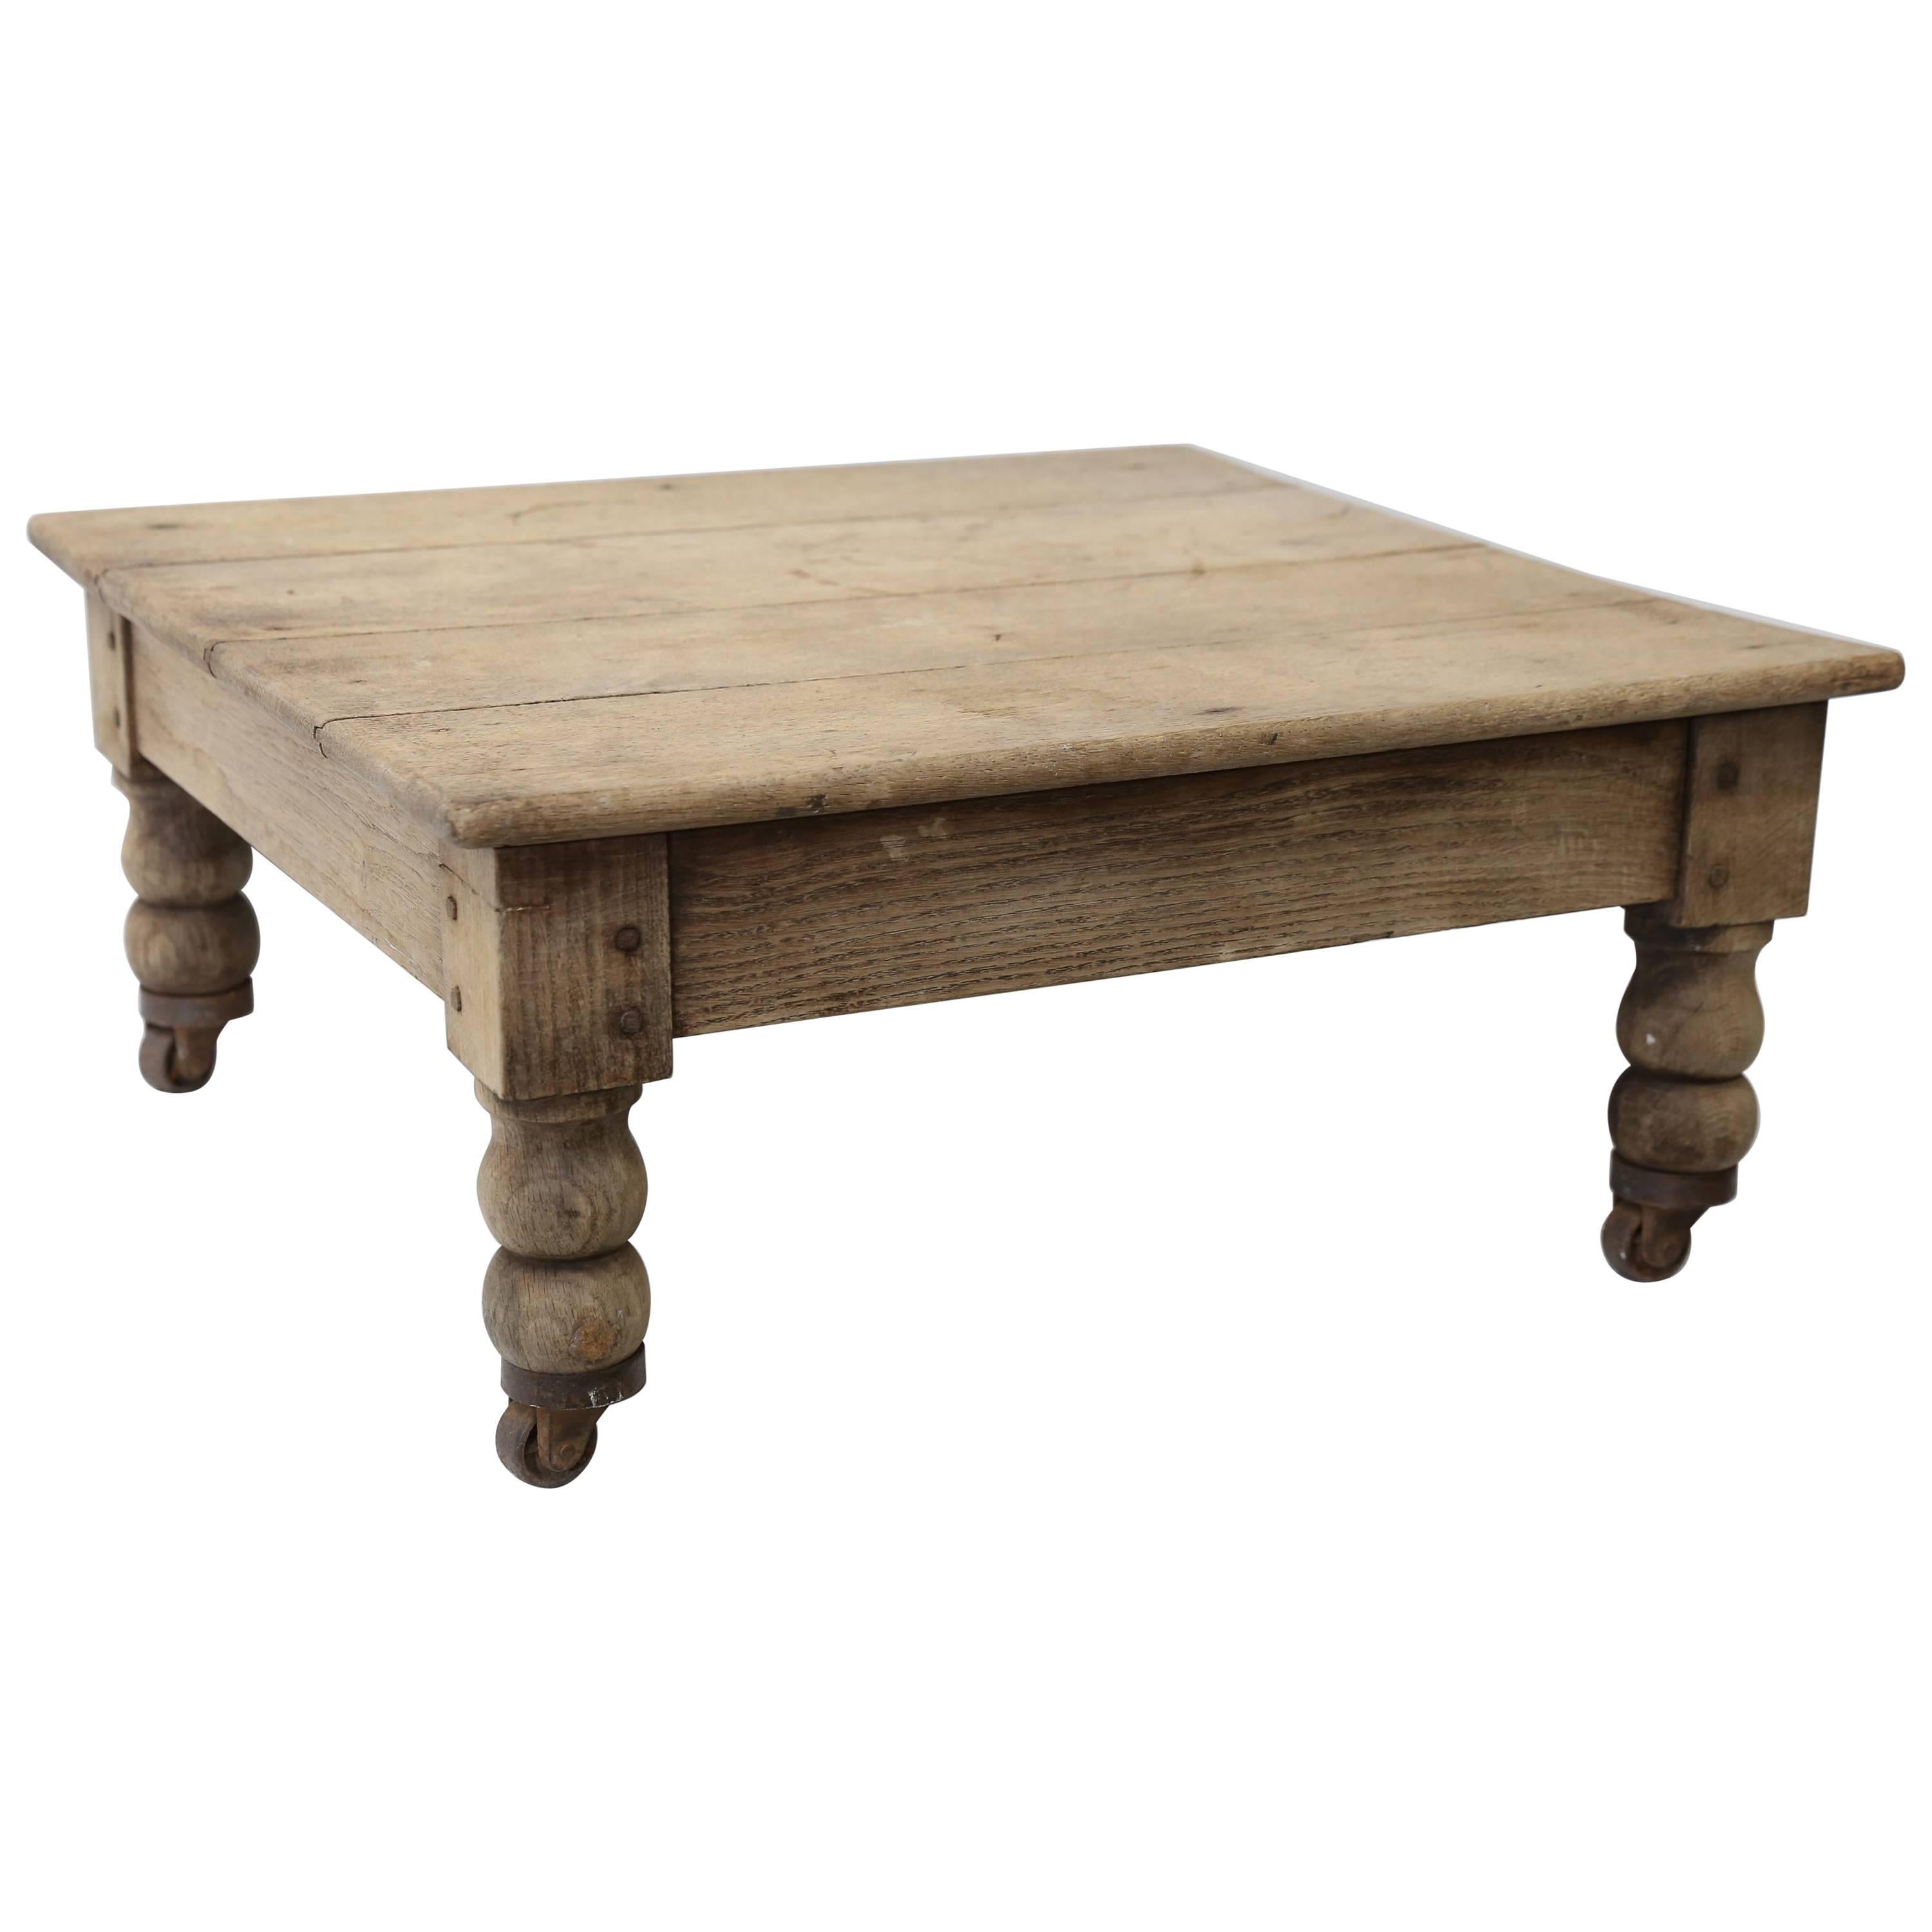 Low Wood Table from France